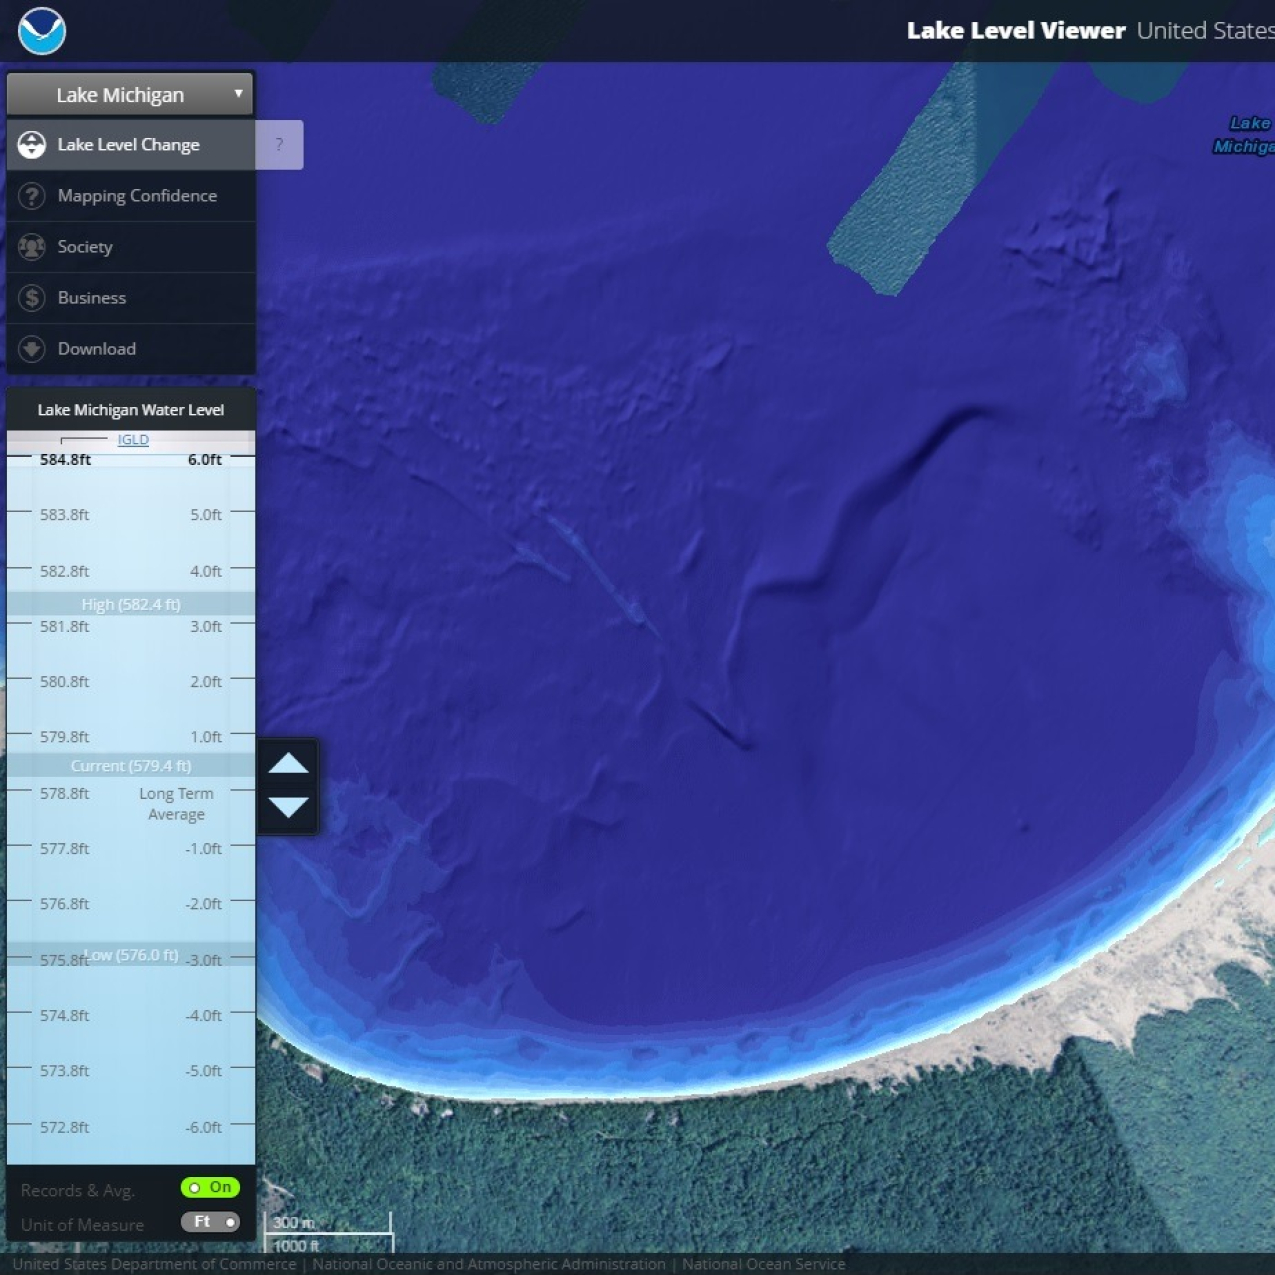 Screenshot of the Lake Level Viewer tool, which is displaying aerial imagery of Lake Michigan and shows several buttons users can manipulate, such as Mapping confidence, lake level change, opacity, and more.